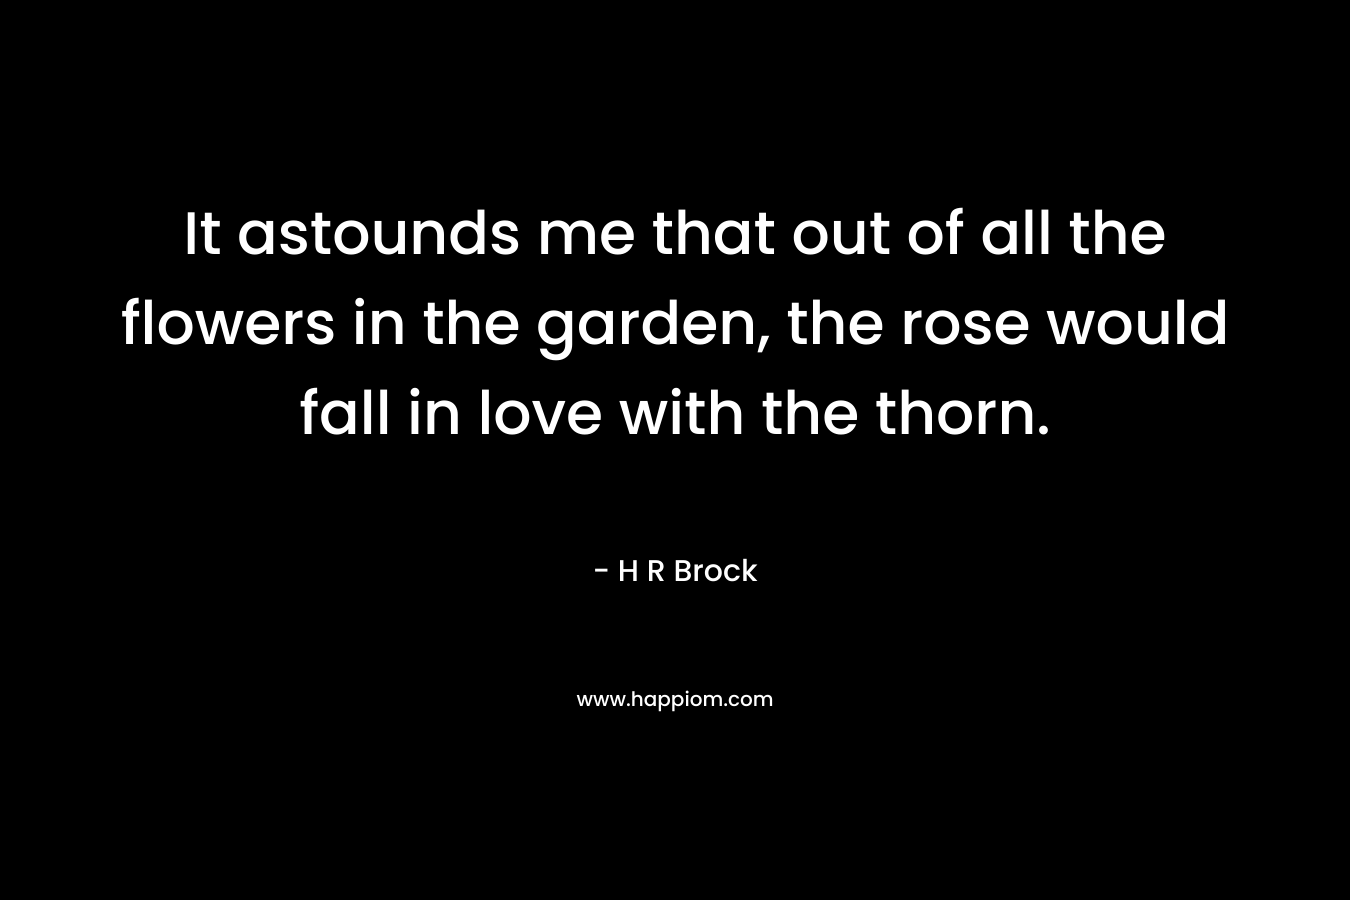 It astounds me that out of all the flowers in the garden, the rose would fall in love with the thorn. – H R Brock